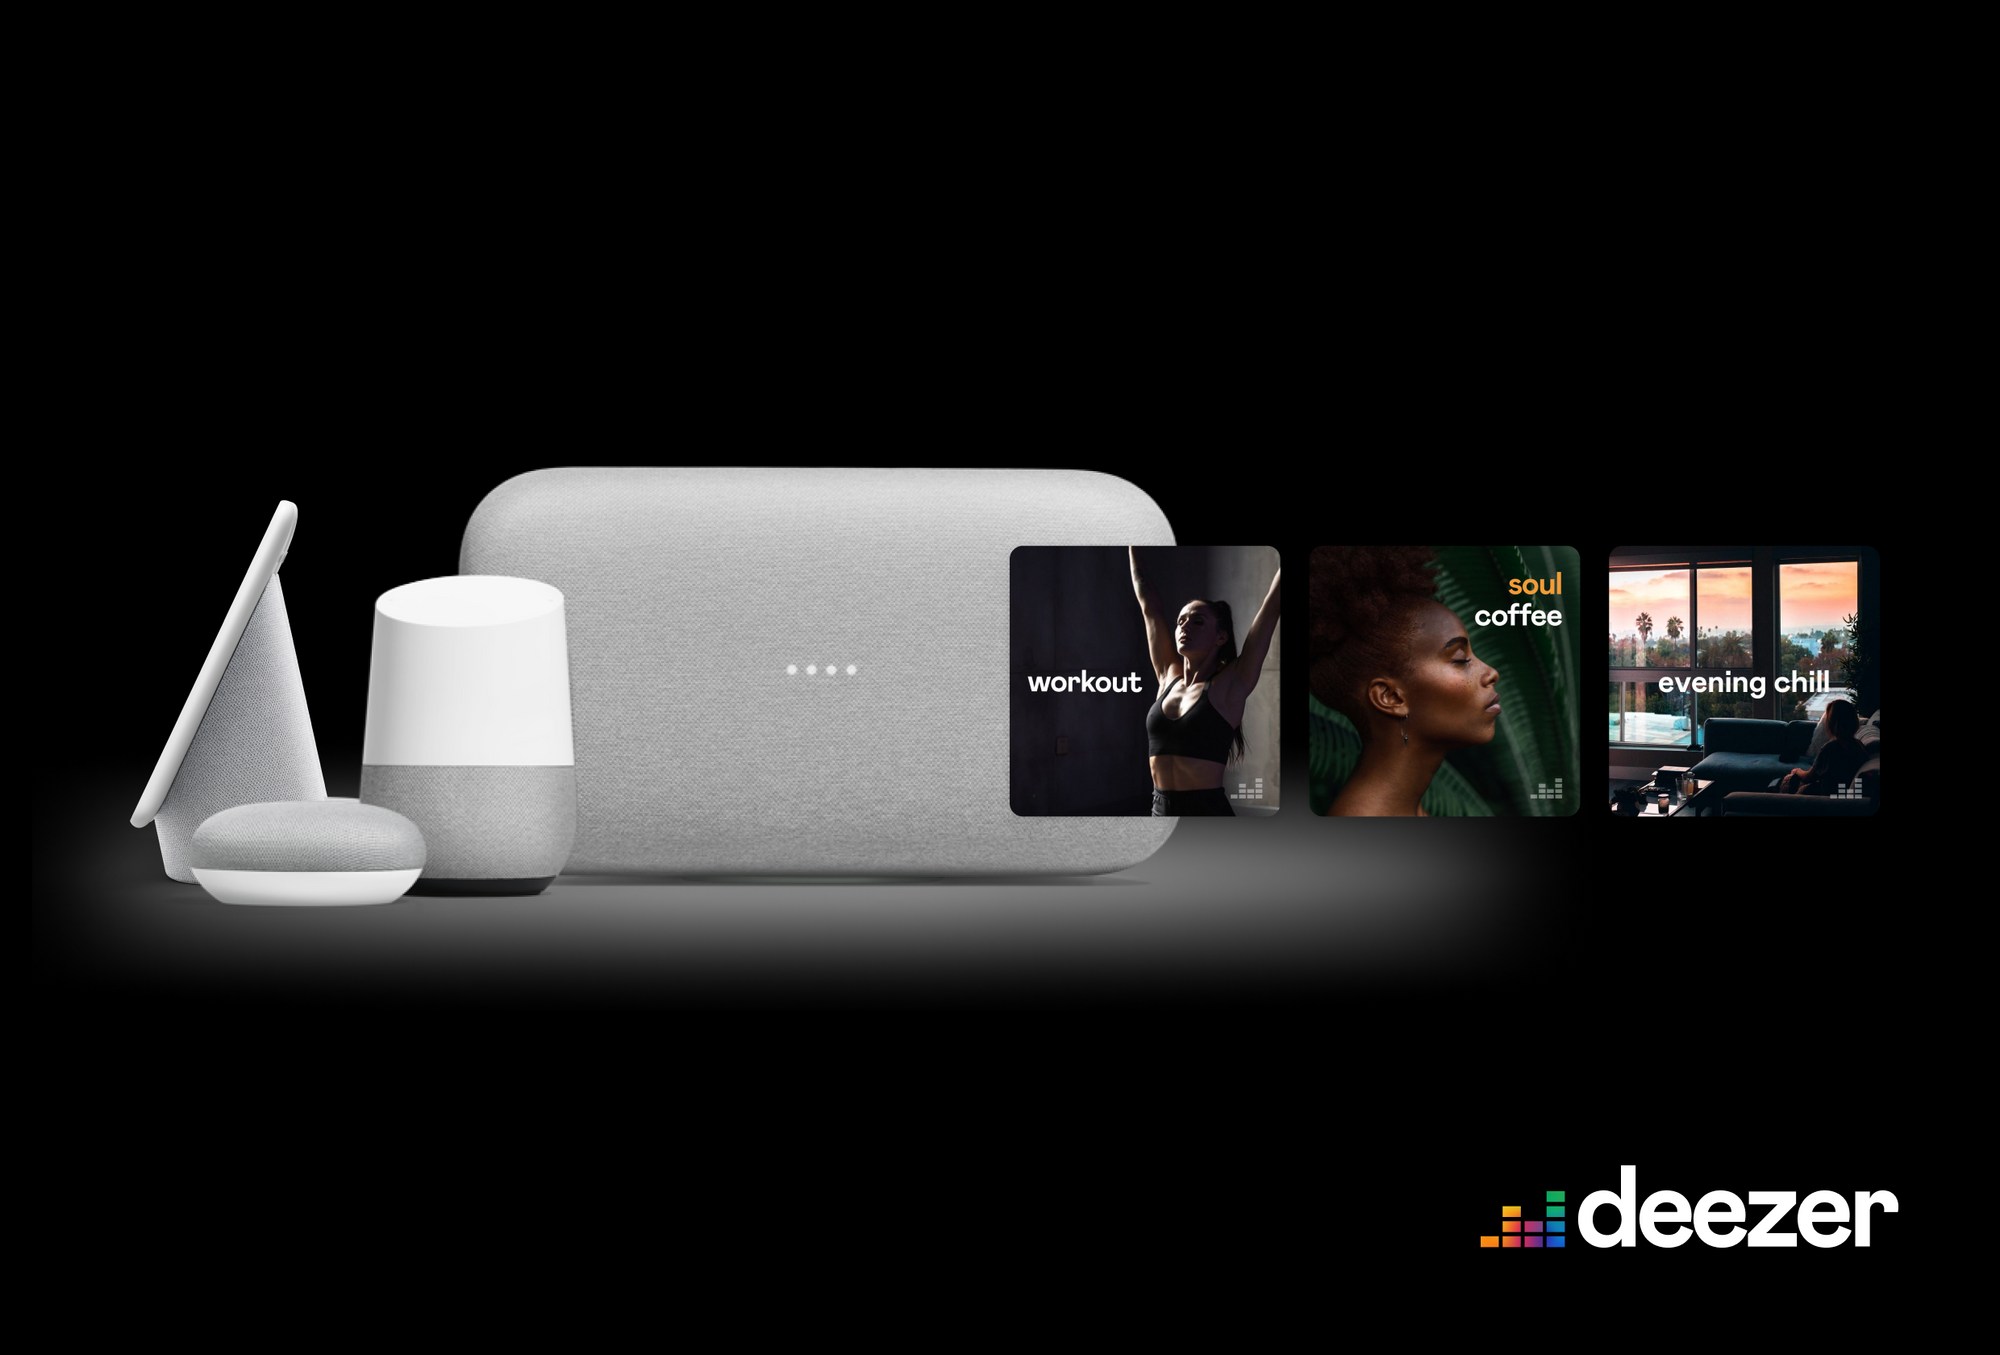 Deezer Free is now available on Google Home, with ads